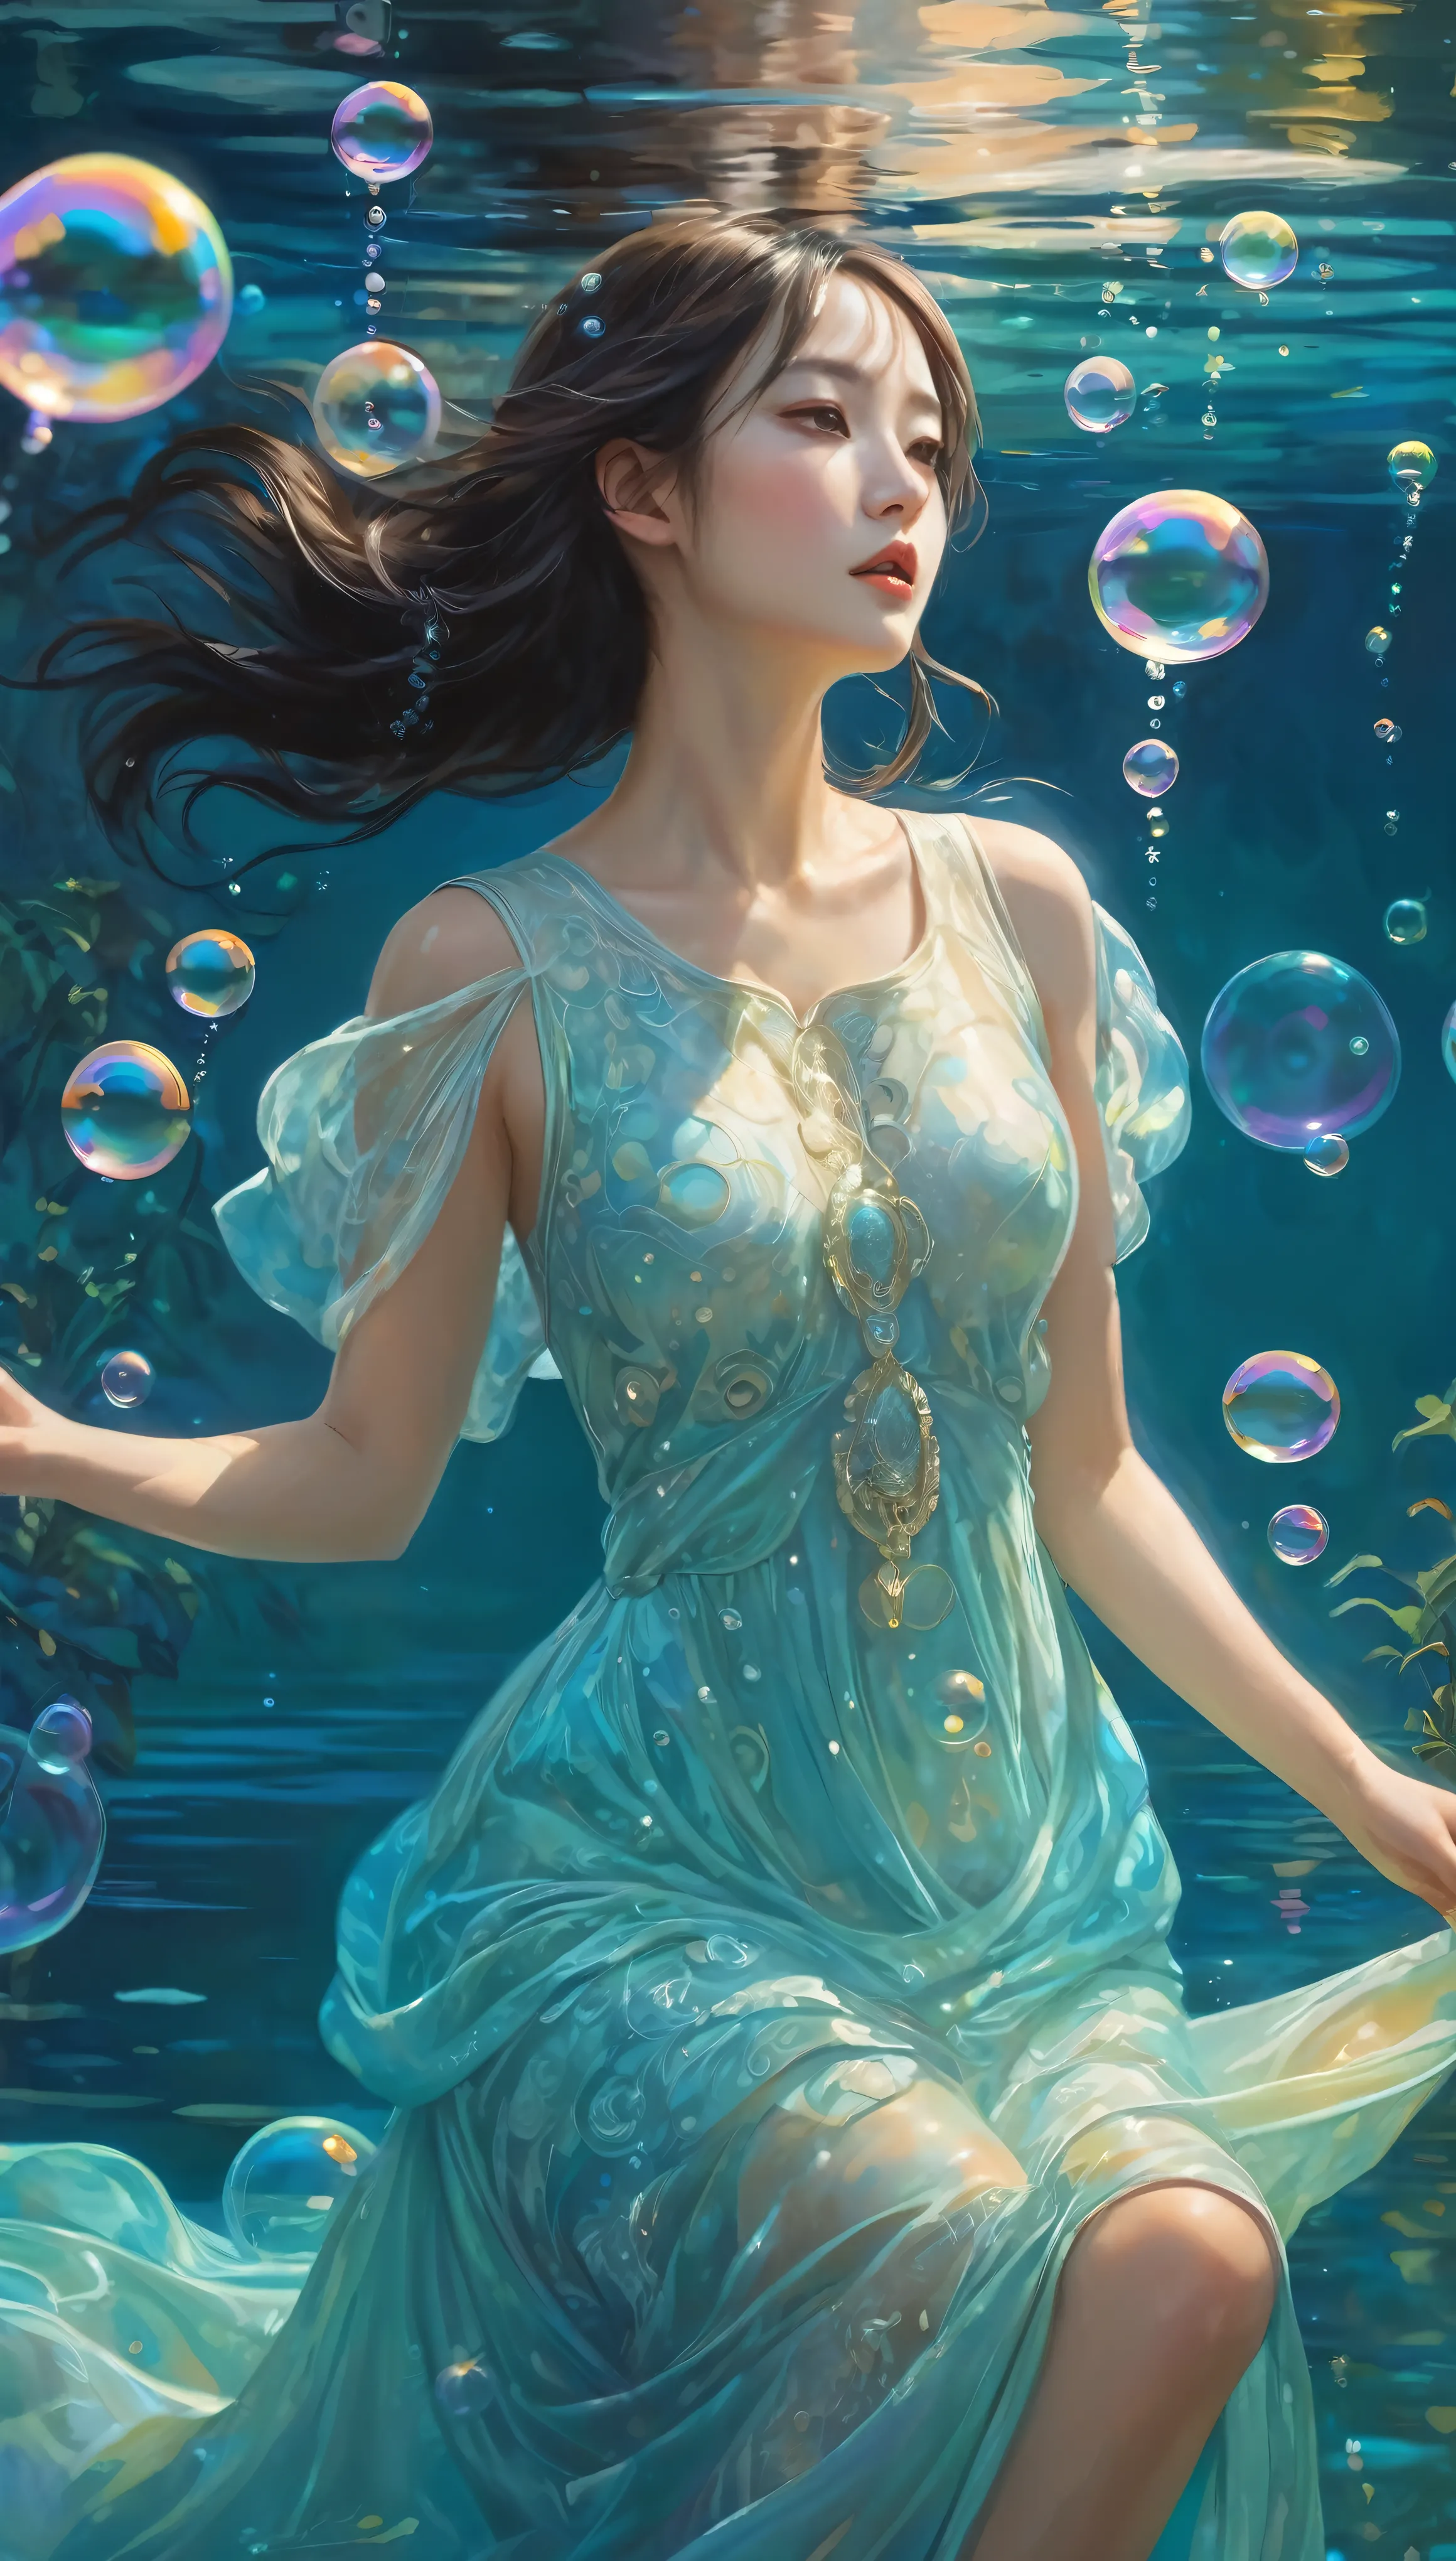 A woman in a mysterious dress、Picture a captivating picture of someone engaging in the playful act of blowing bubbles。The bubble...